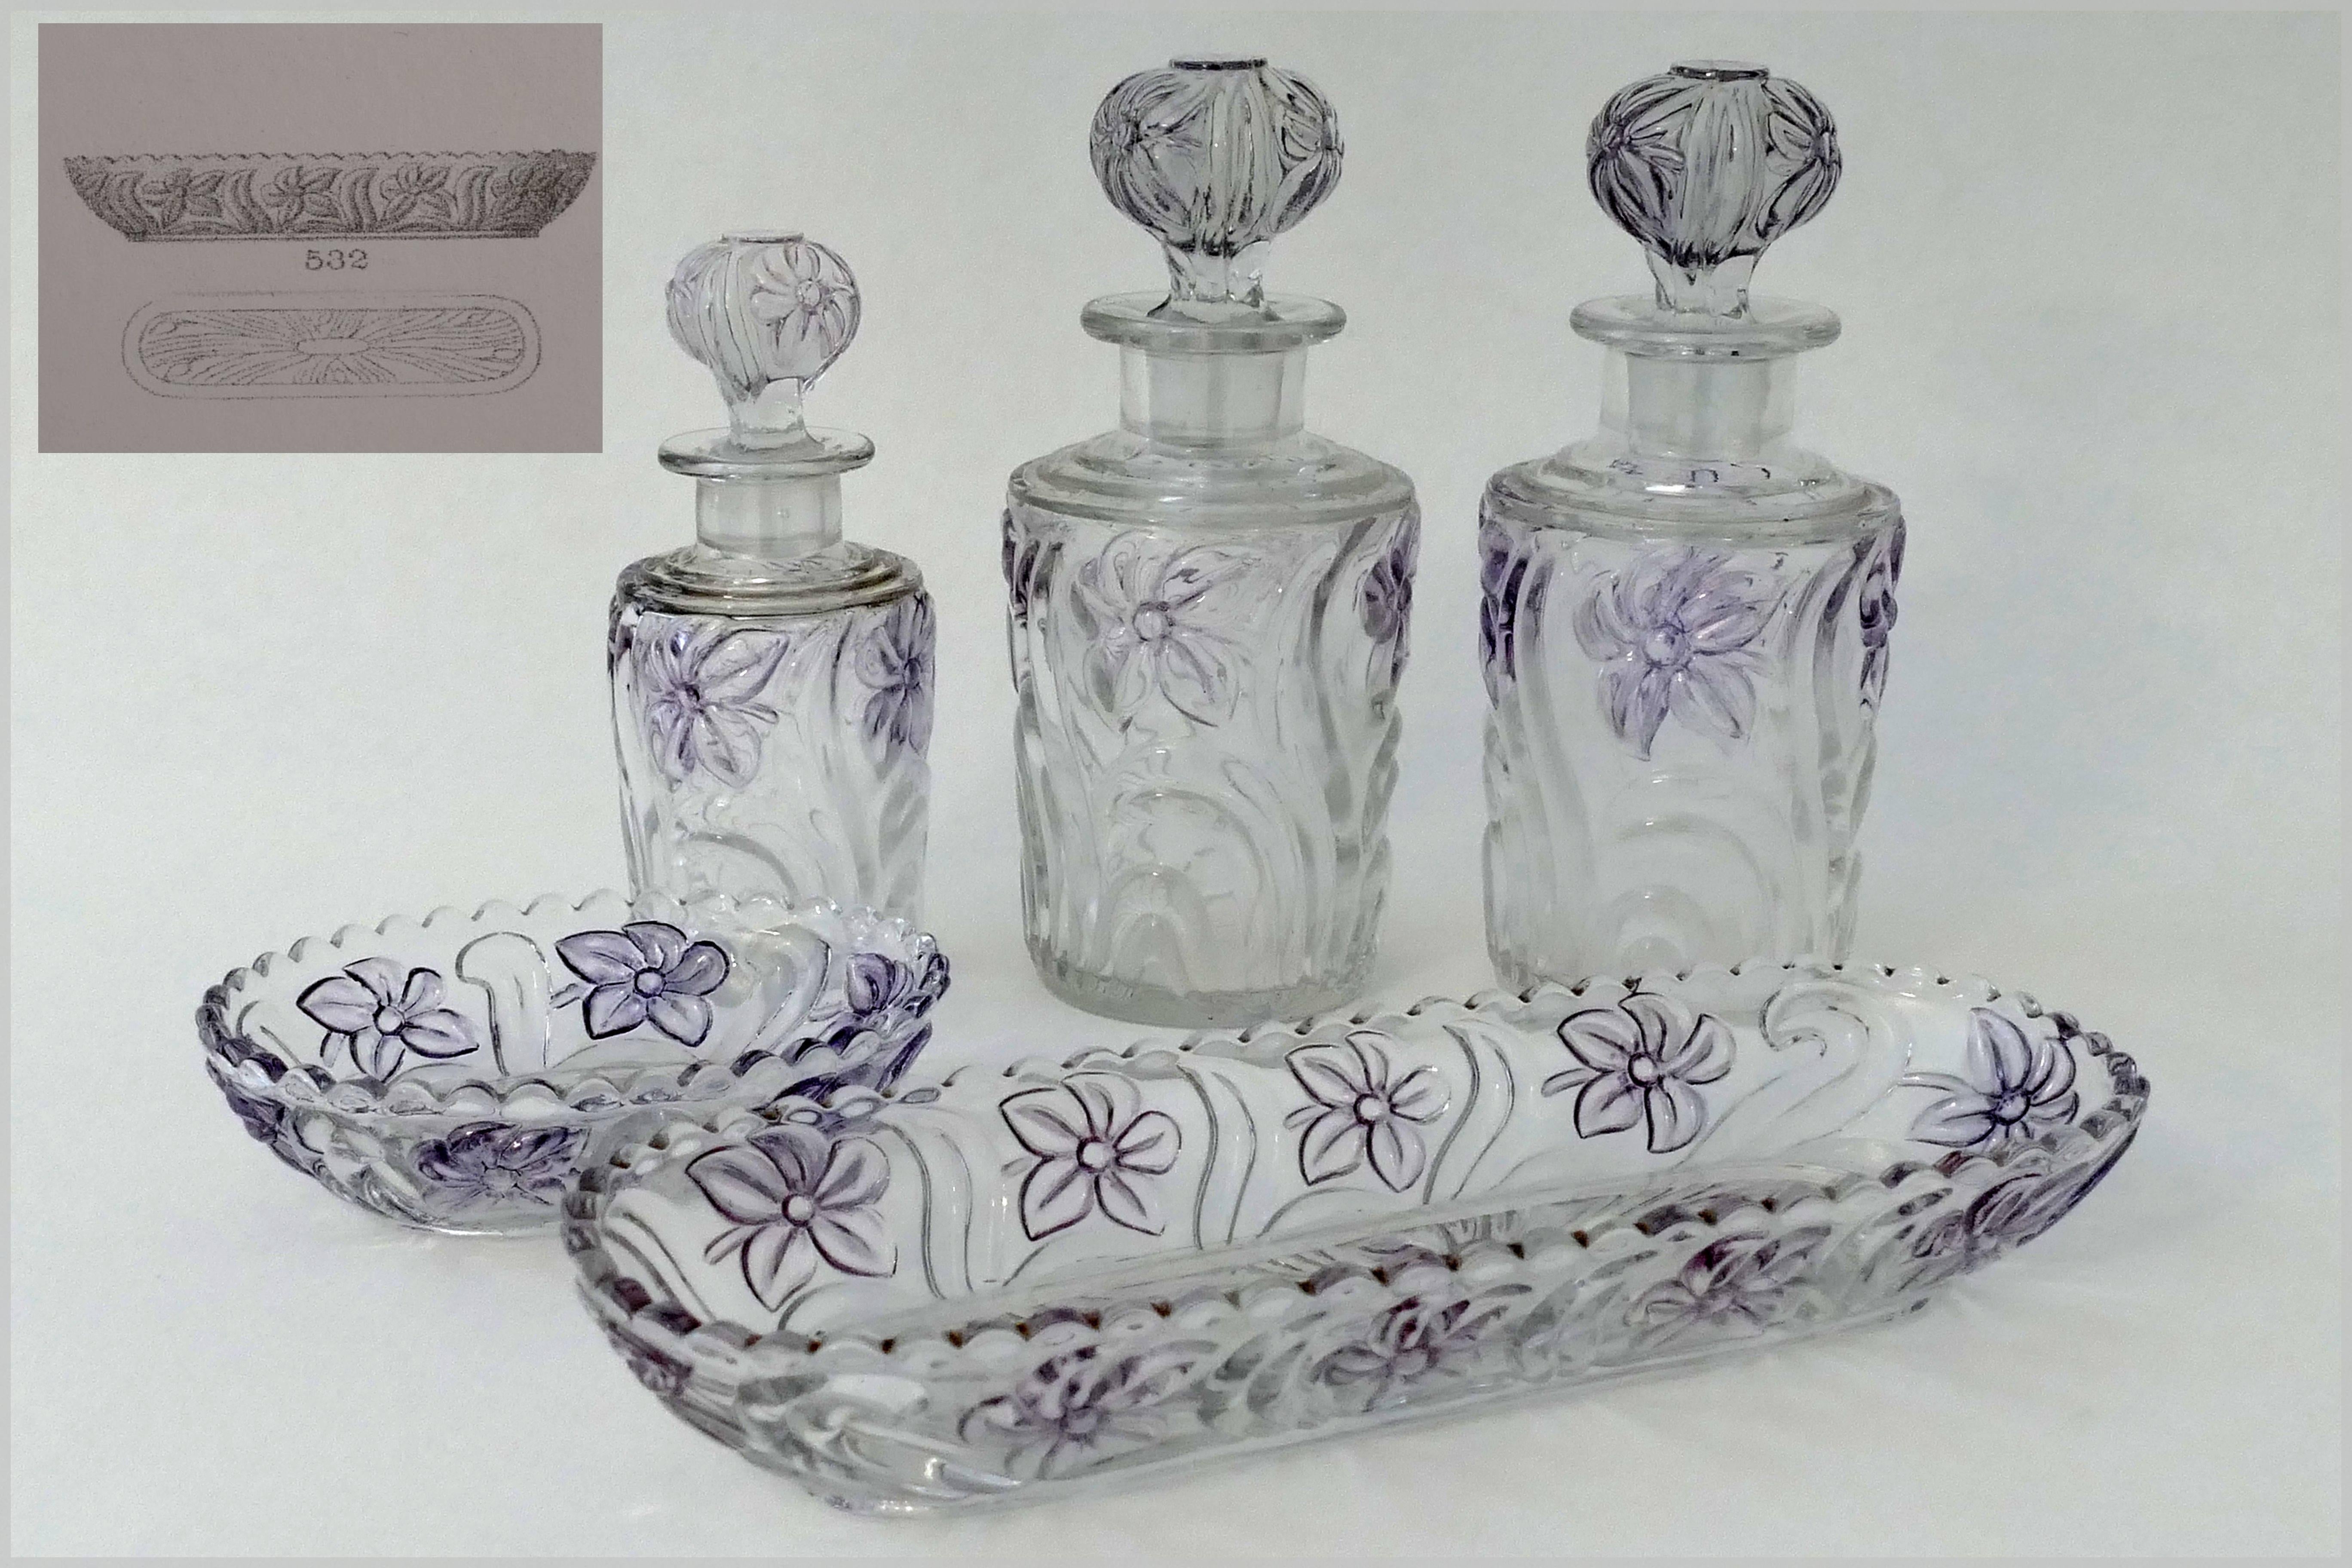 Fabulous French Saint Louis crystal dresser or vanity set of five pieces. Comprising of three bottles, a comb holder and soap dish. Amazing color amethyst reflections on floral decor. 

Heavy, and bright, all pieces are marked Saint Louis in relief.